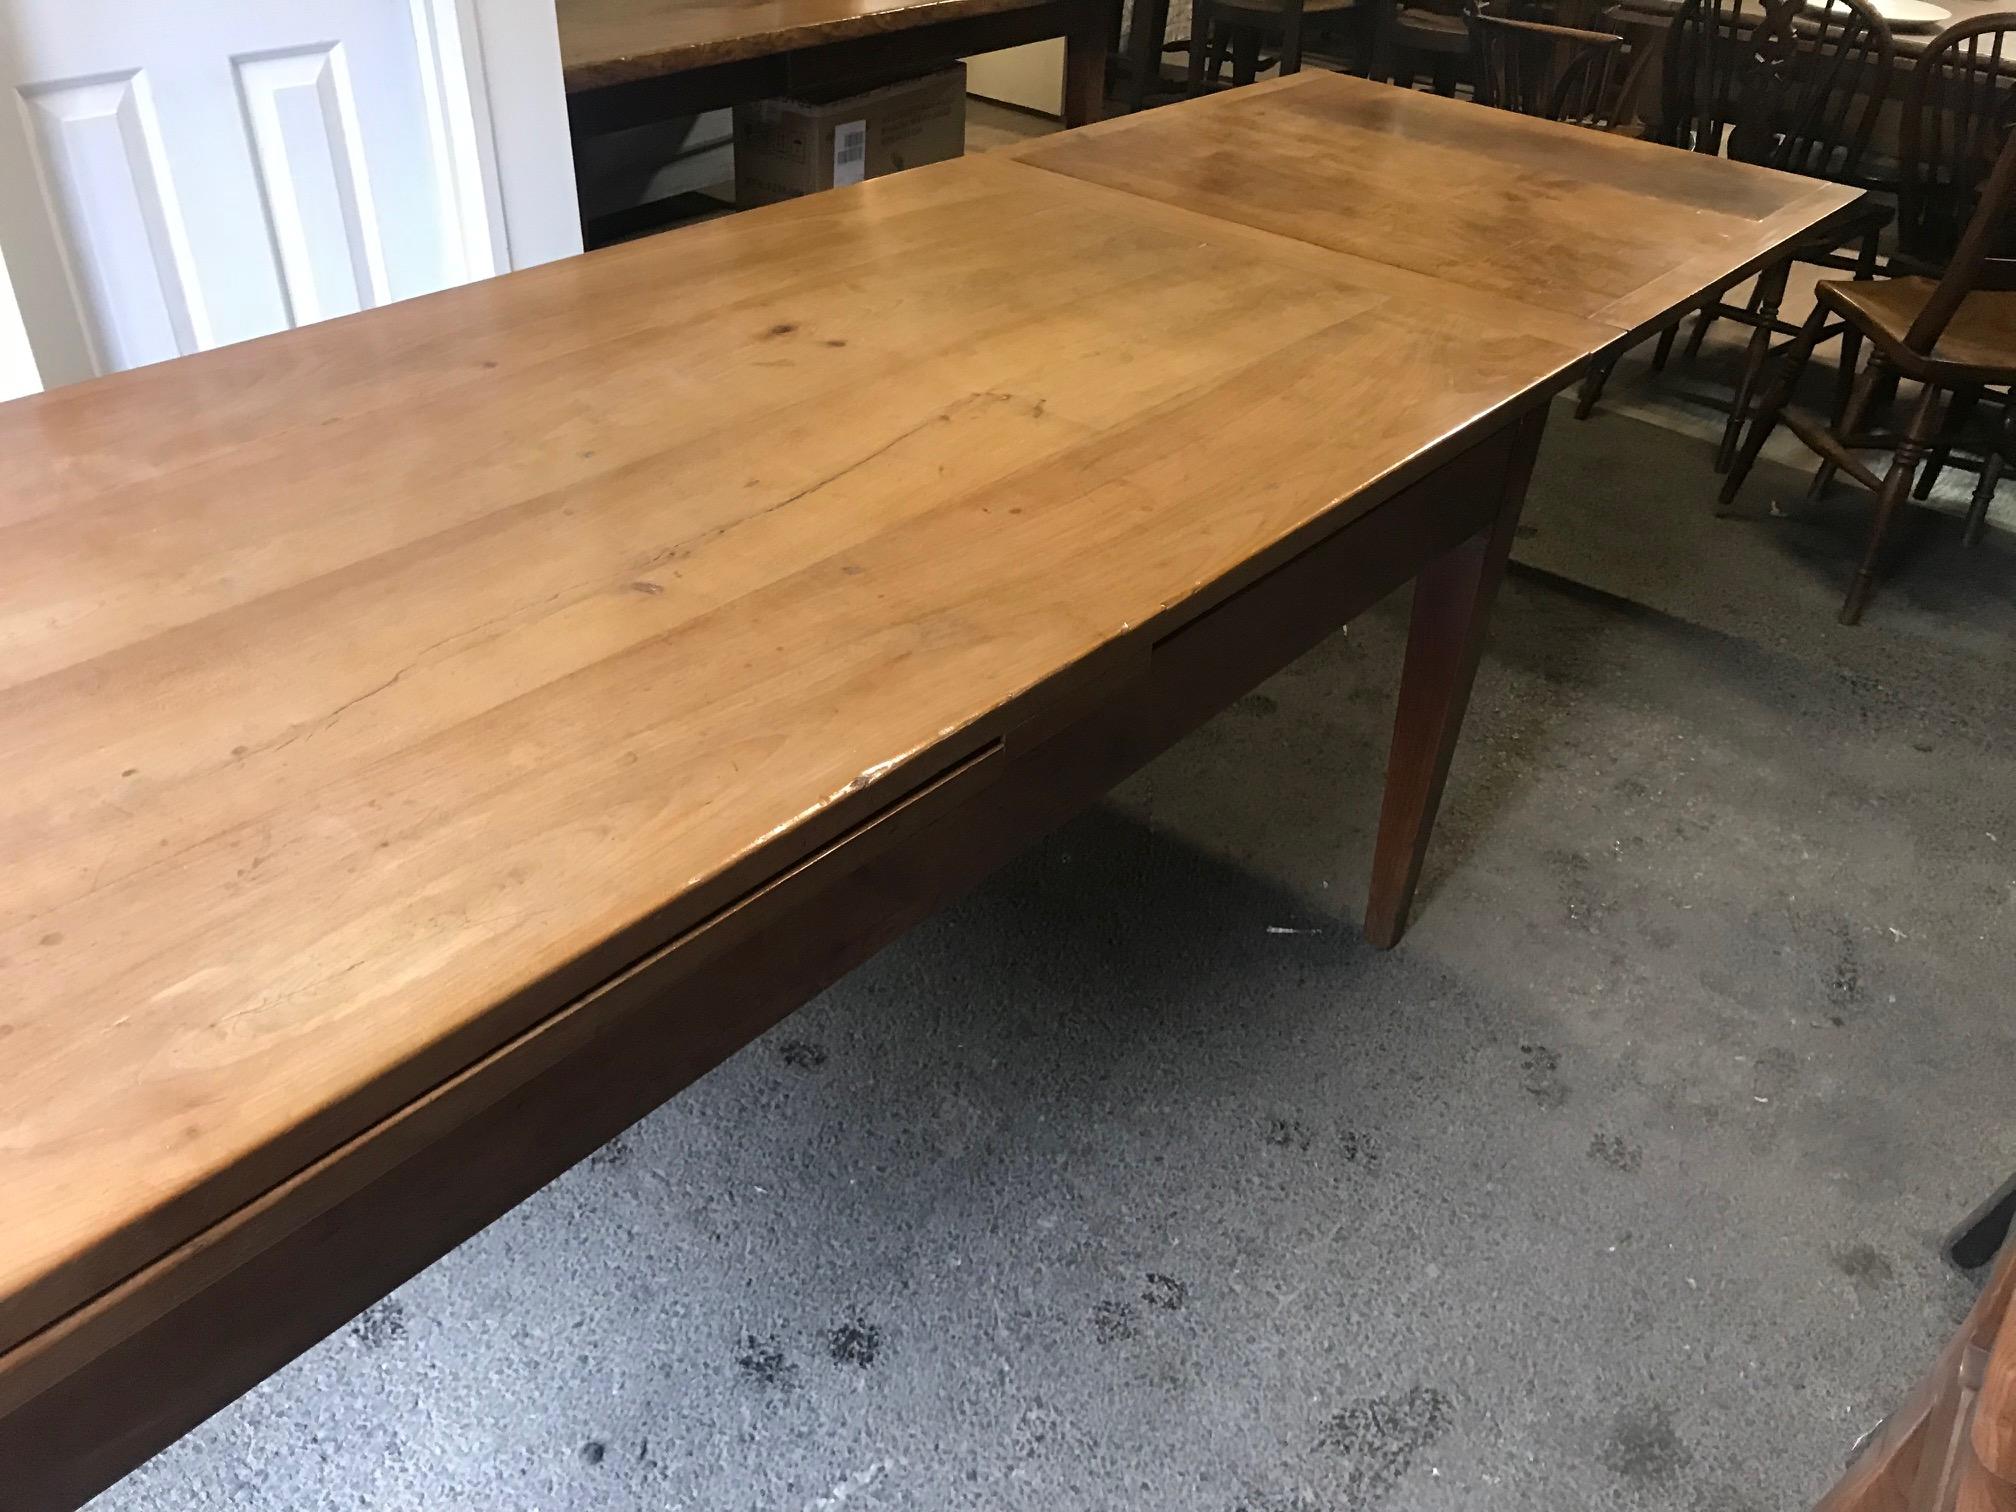 19th century cherry draw-leaf table. Beautiful 19th century cherry double extending table. Seats 8 people comfortably when closed and 12/'14 when open. The table opens to 138